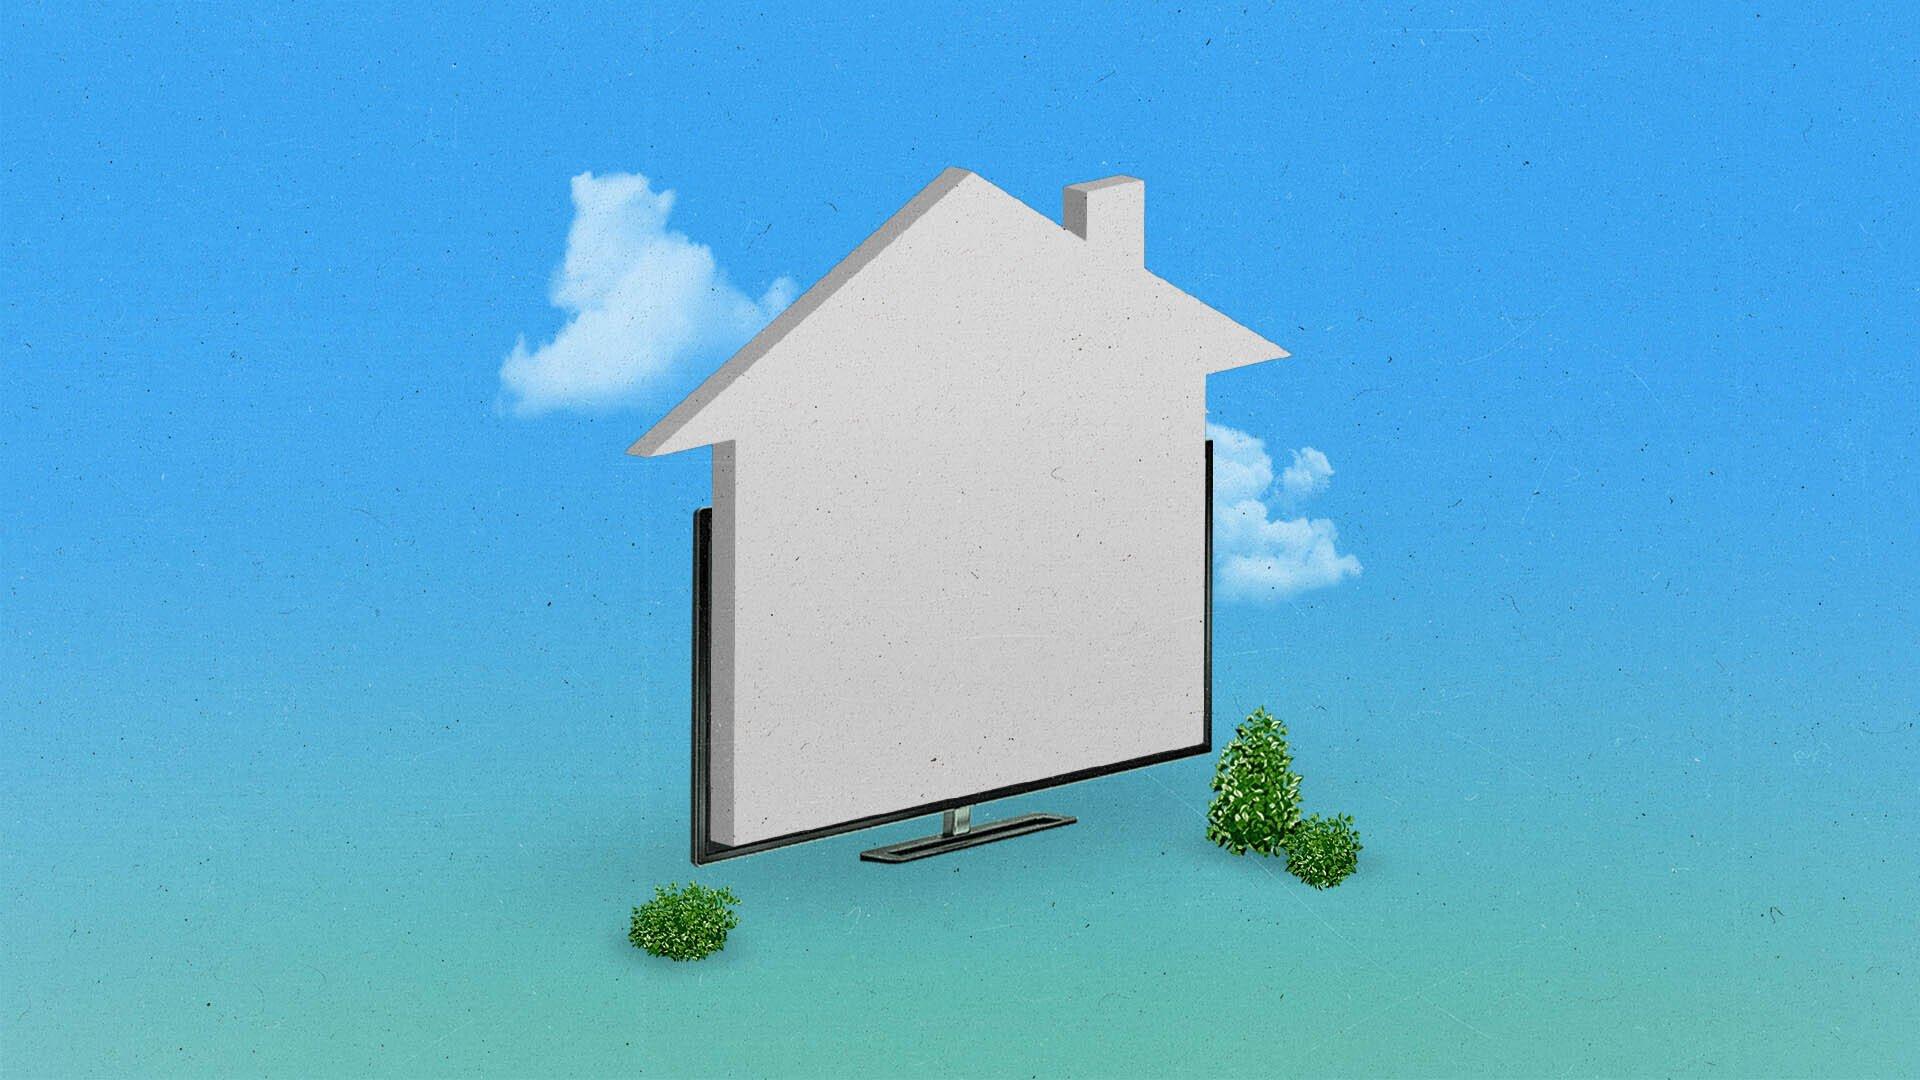 A large upward arrow shaped like a house rises from a connected TV screen.